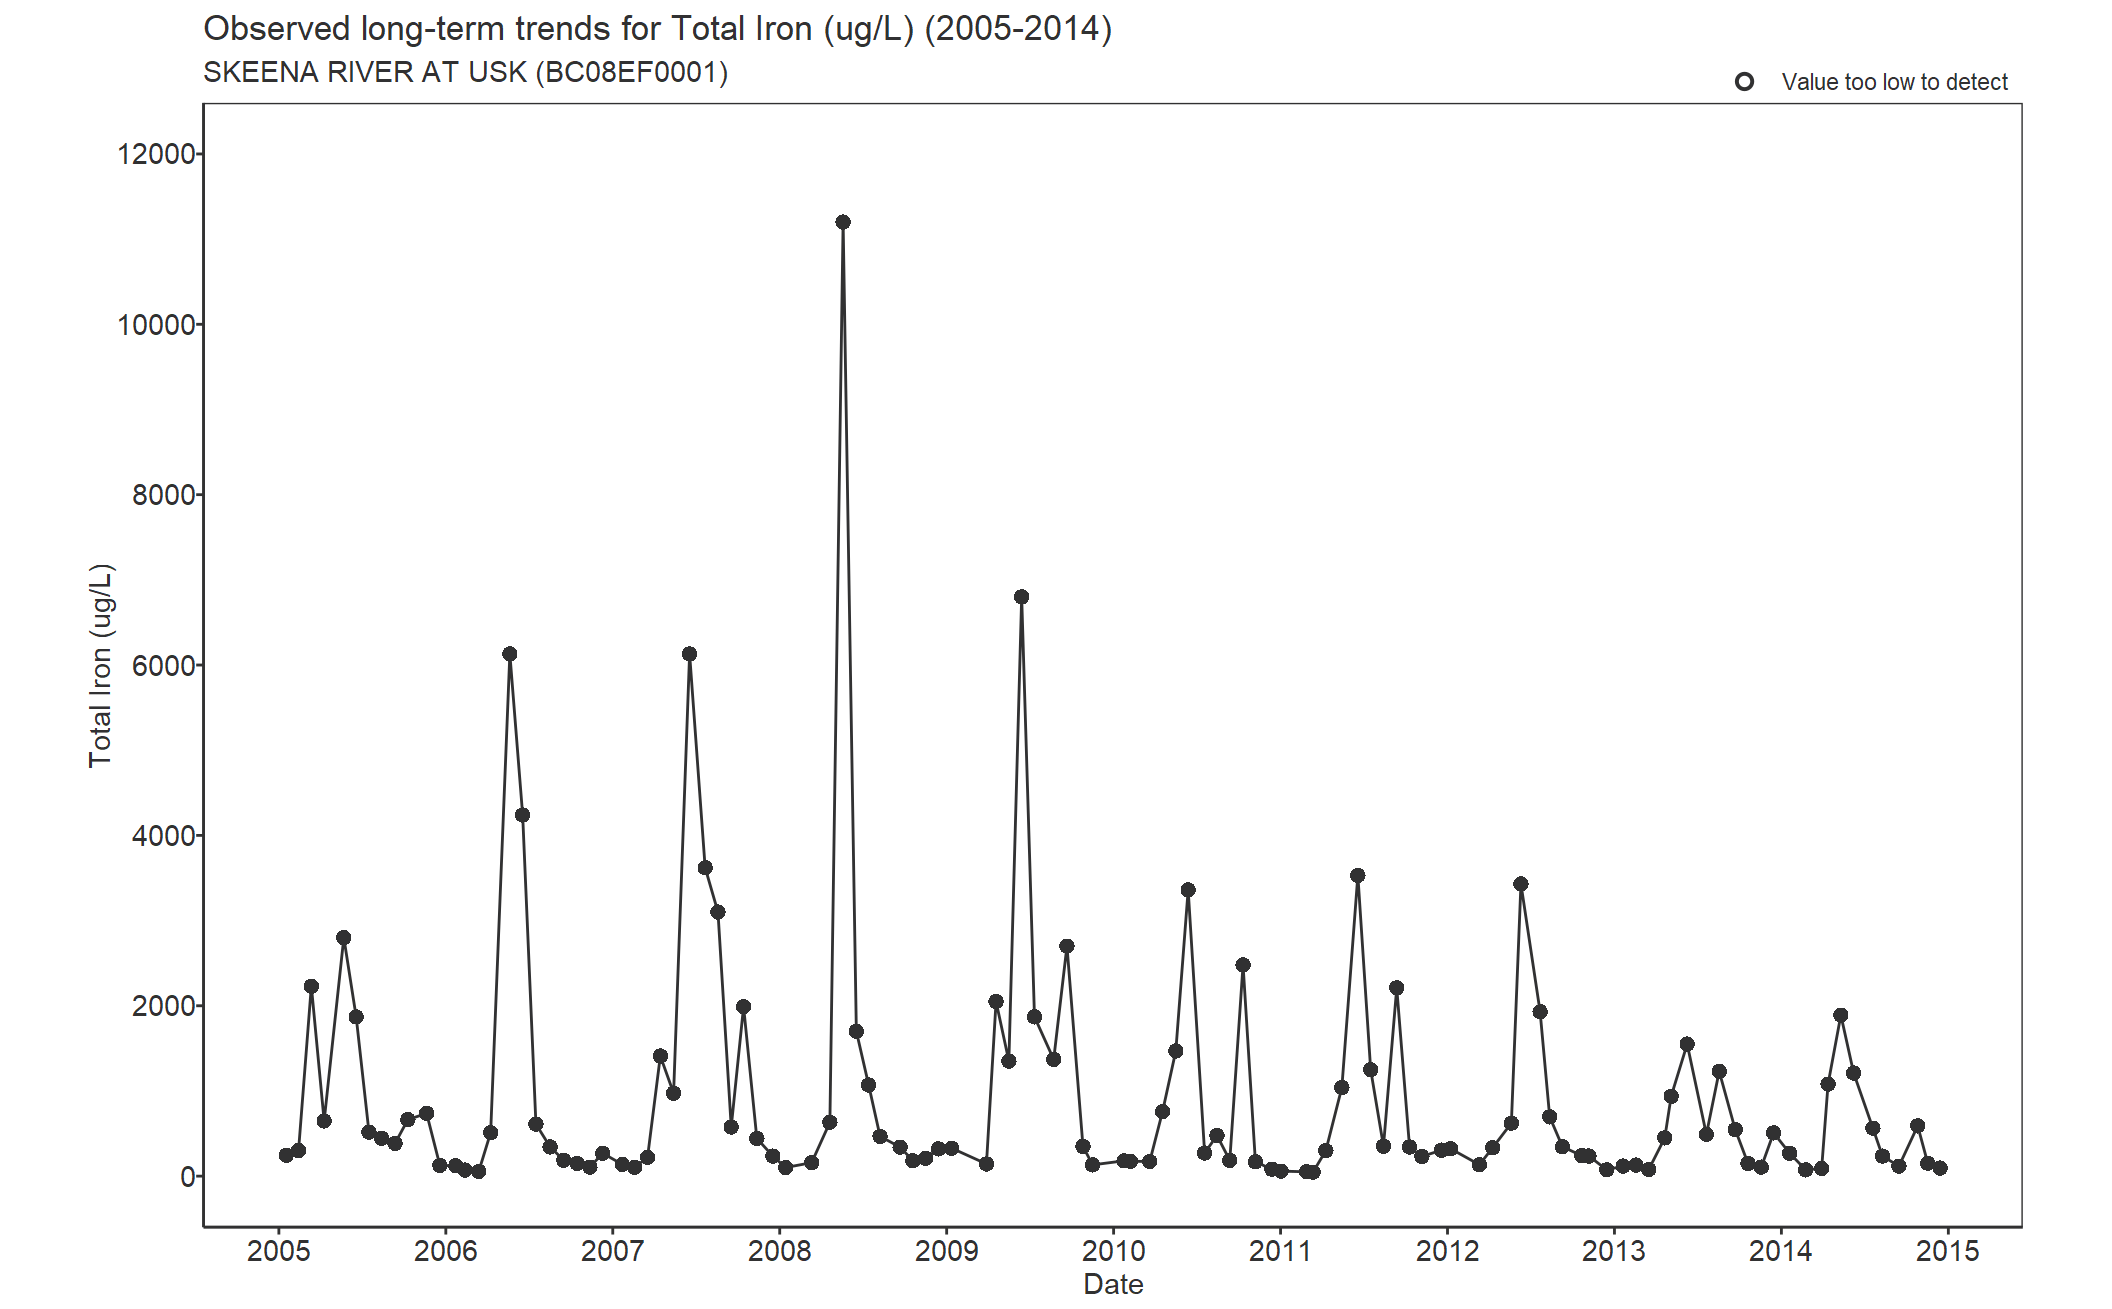 Observed long-term trends for Total Iron (2005-2014)